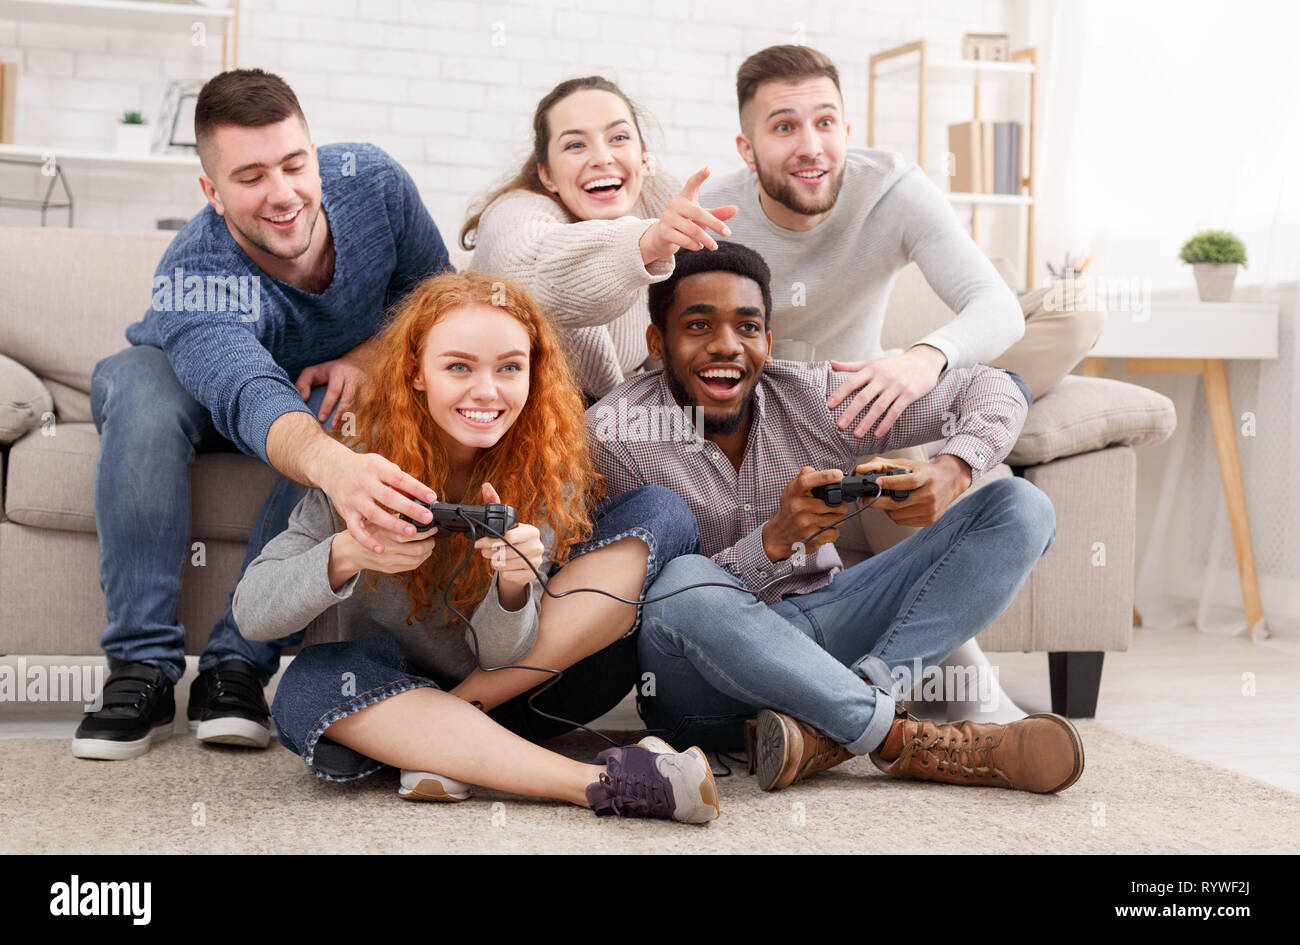 Adult friends playing video games, sitting on floor at home Stock Photo